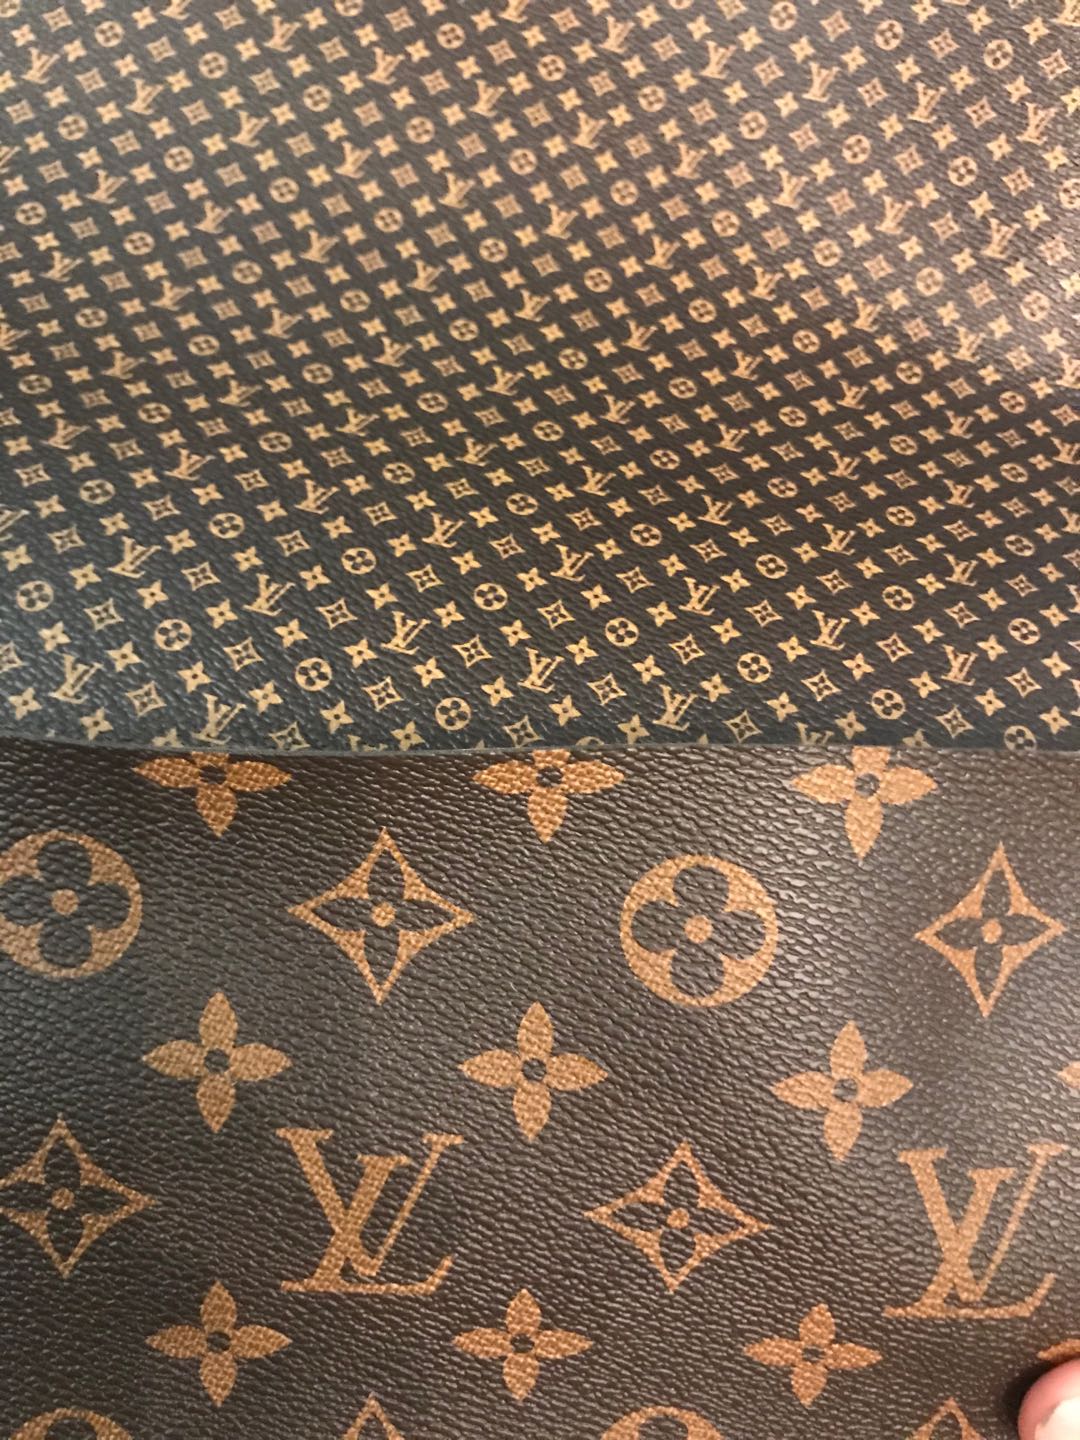 Mini Small  LV Leather Fabric for Bag and Crafting